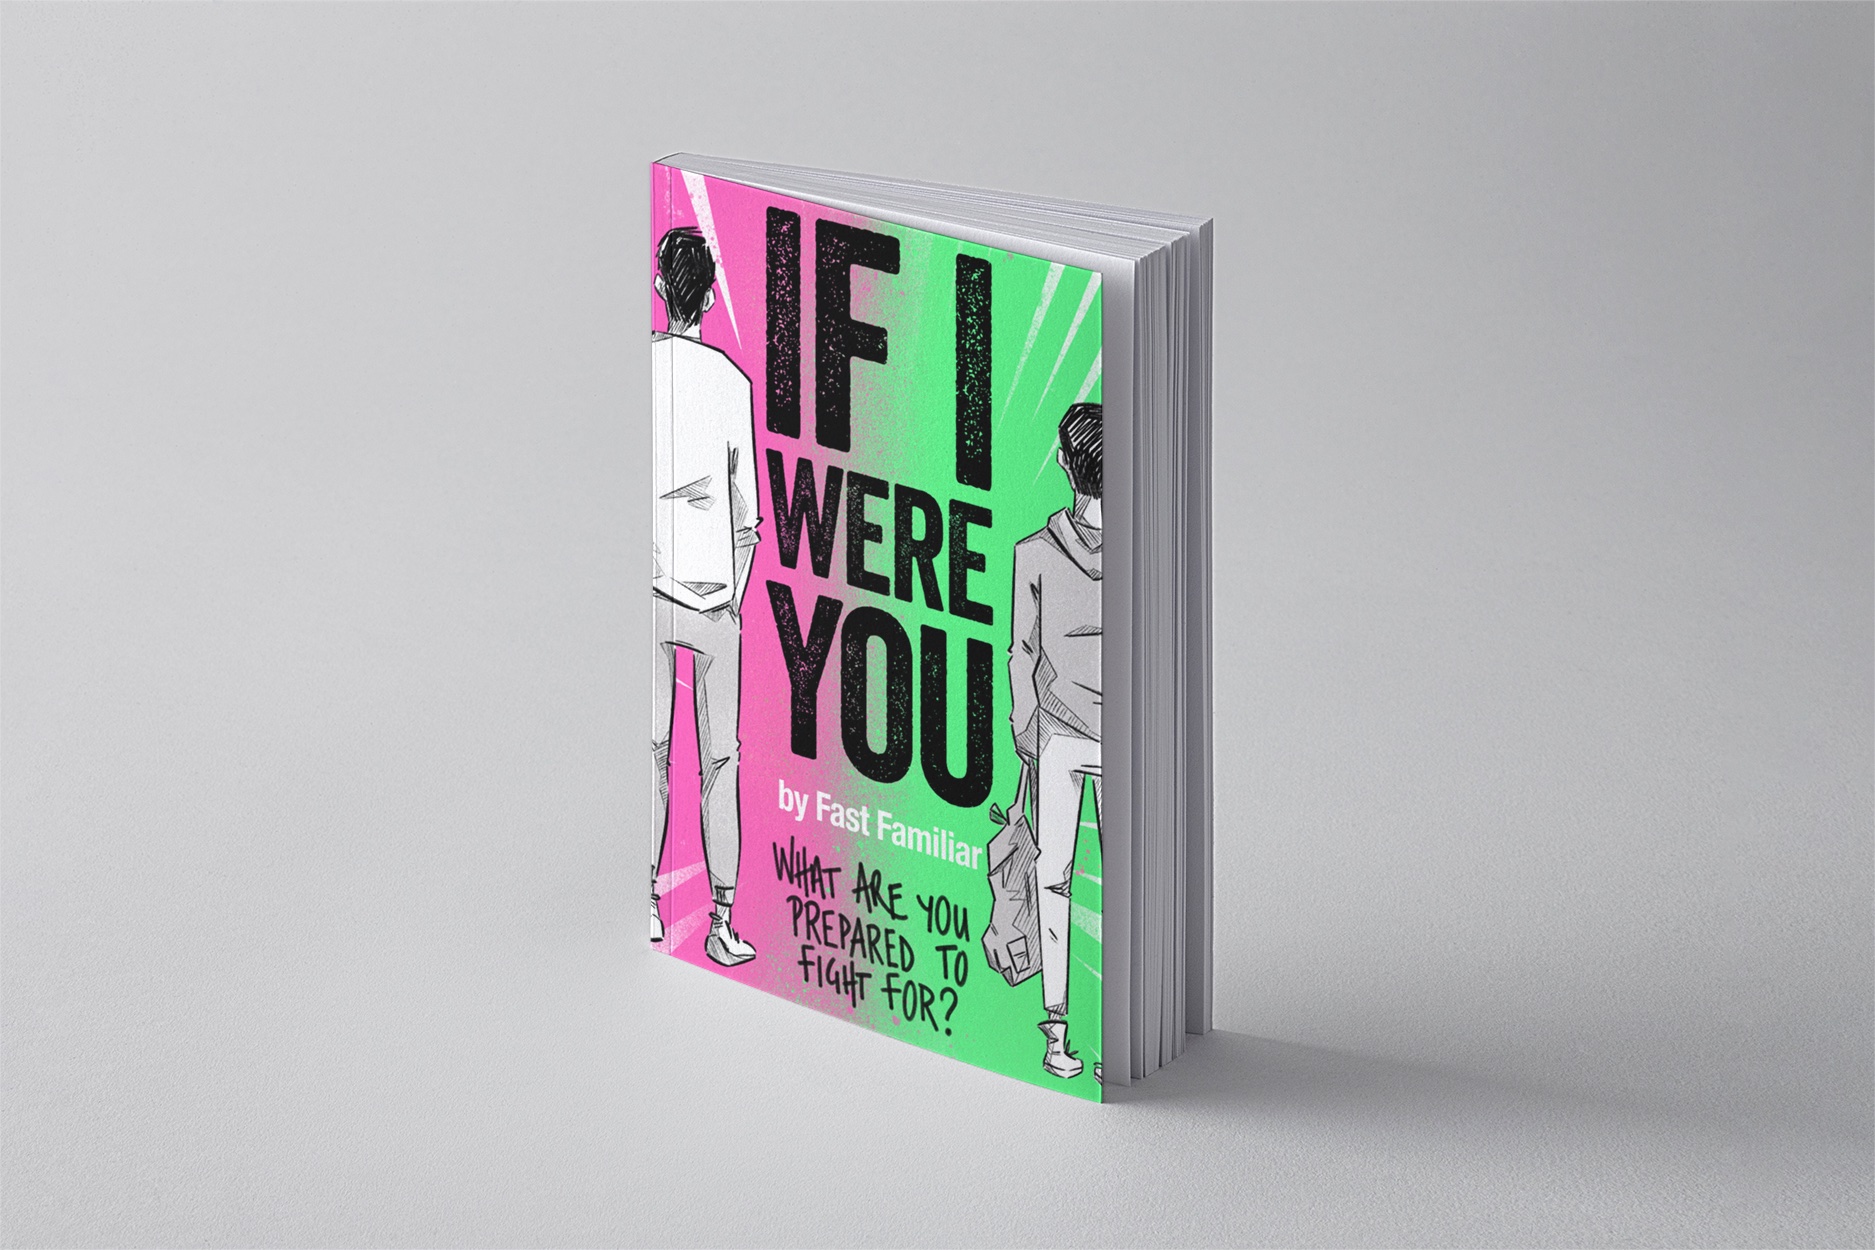 Promotional material for If I Were You: a book standing up. On the cover are two young people looking into the distance and the words 'what are you prepared to fight for?'